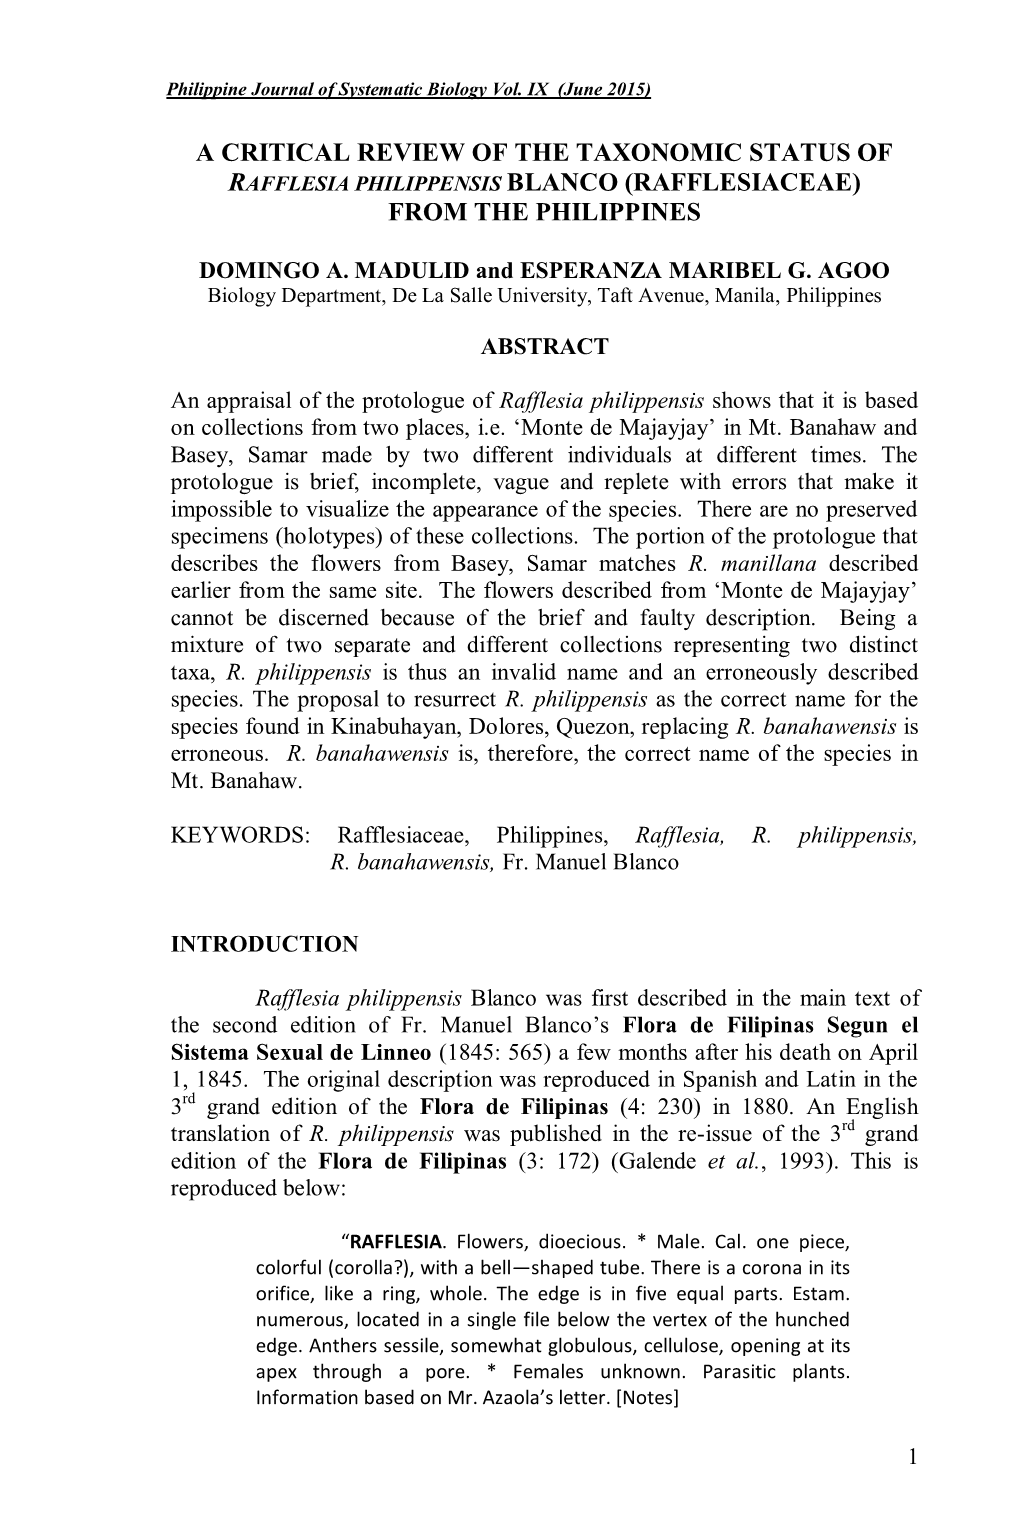 A Critical Review of the Taxonomic Status of Rafflesia Philippensis Blanco (Rafflesiaceae) from the Philippines